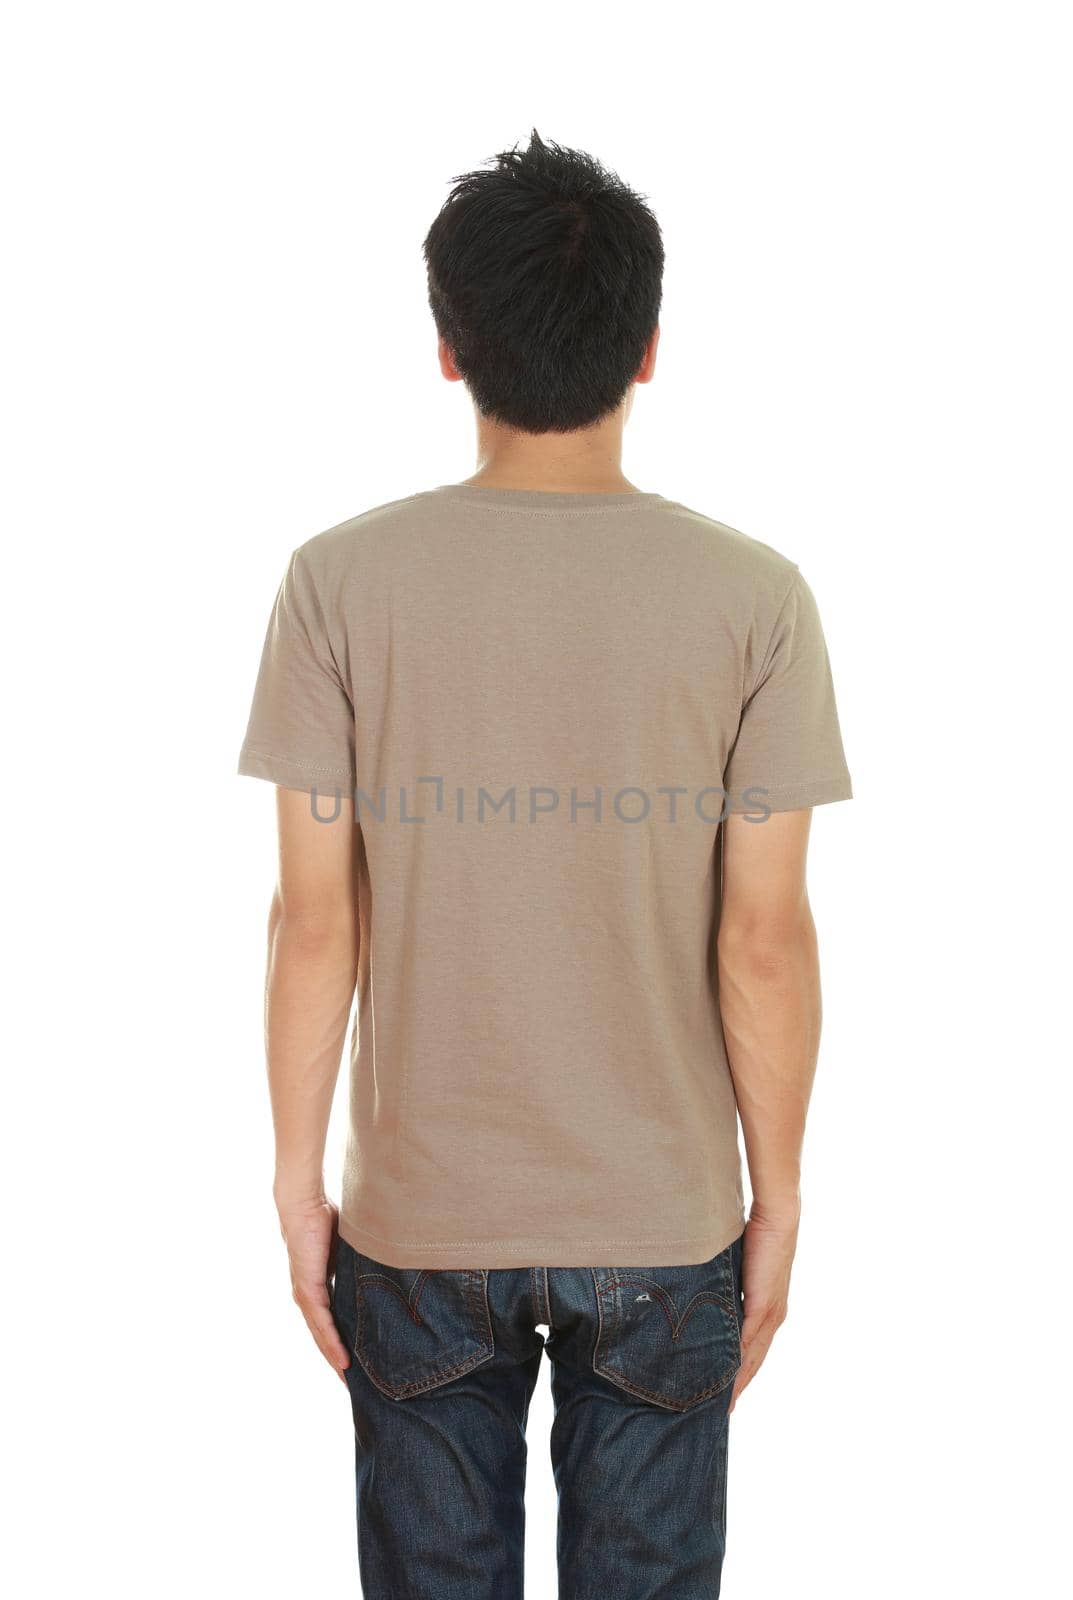 man with blank brown t-shirt (back side) isolated on white background